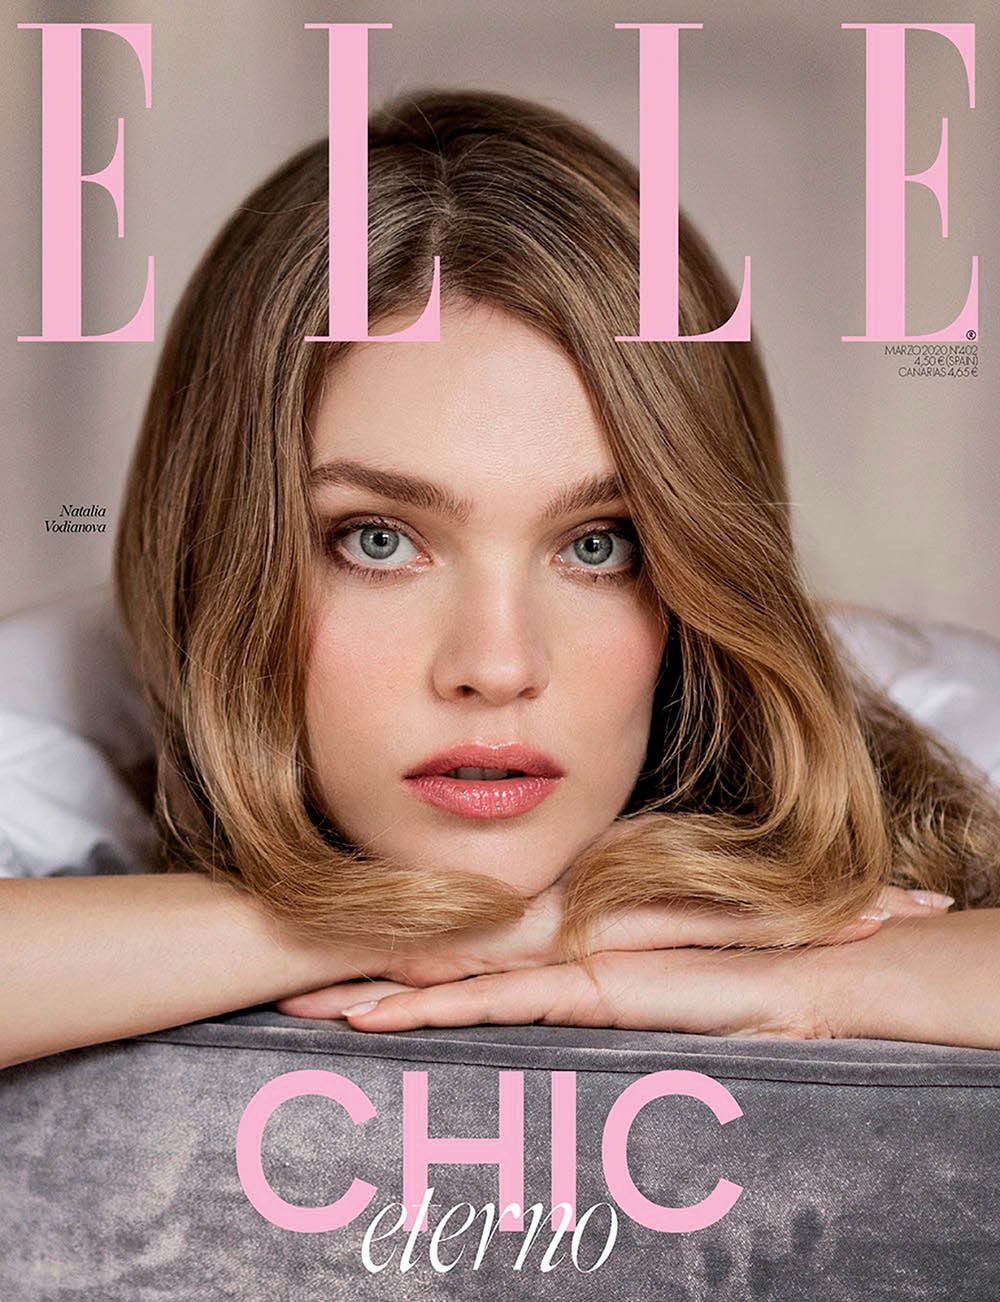 Natalia Vodianova covers Elle Spain March 2020 by Gilles Bensimon